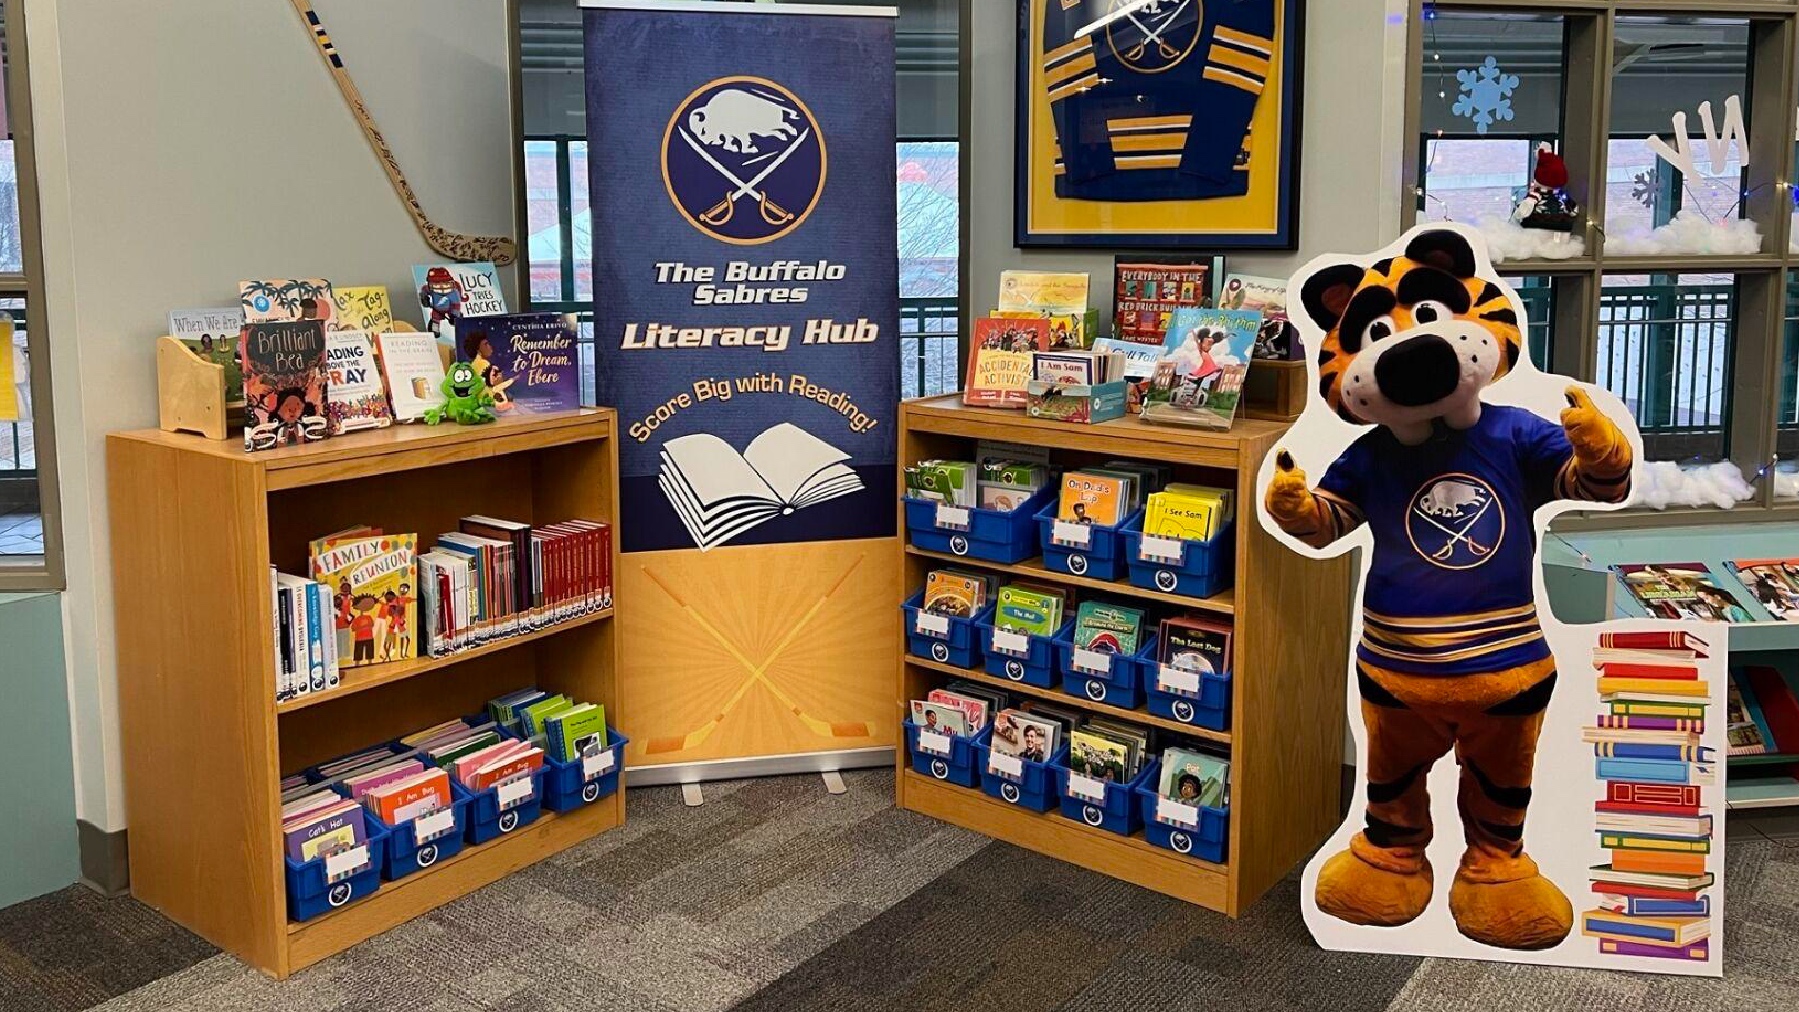 BUFFALO SABRES FOUNDATION JOINS WNY LITERACY INITIATIVE & DONATES LITERACY HUBS TO SCHOOLS